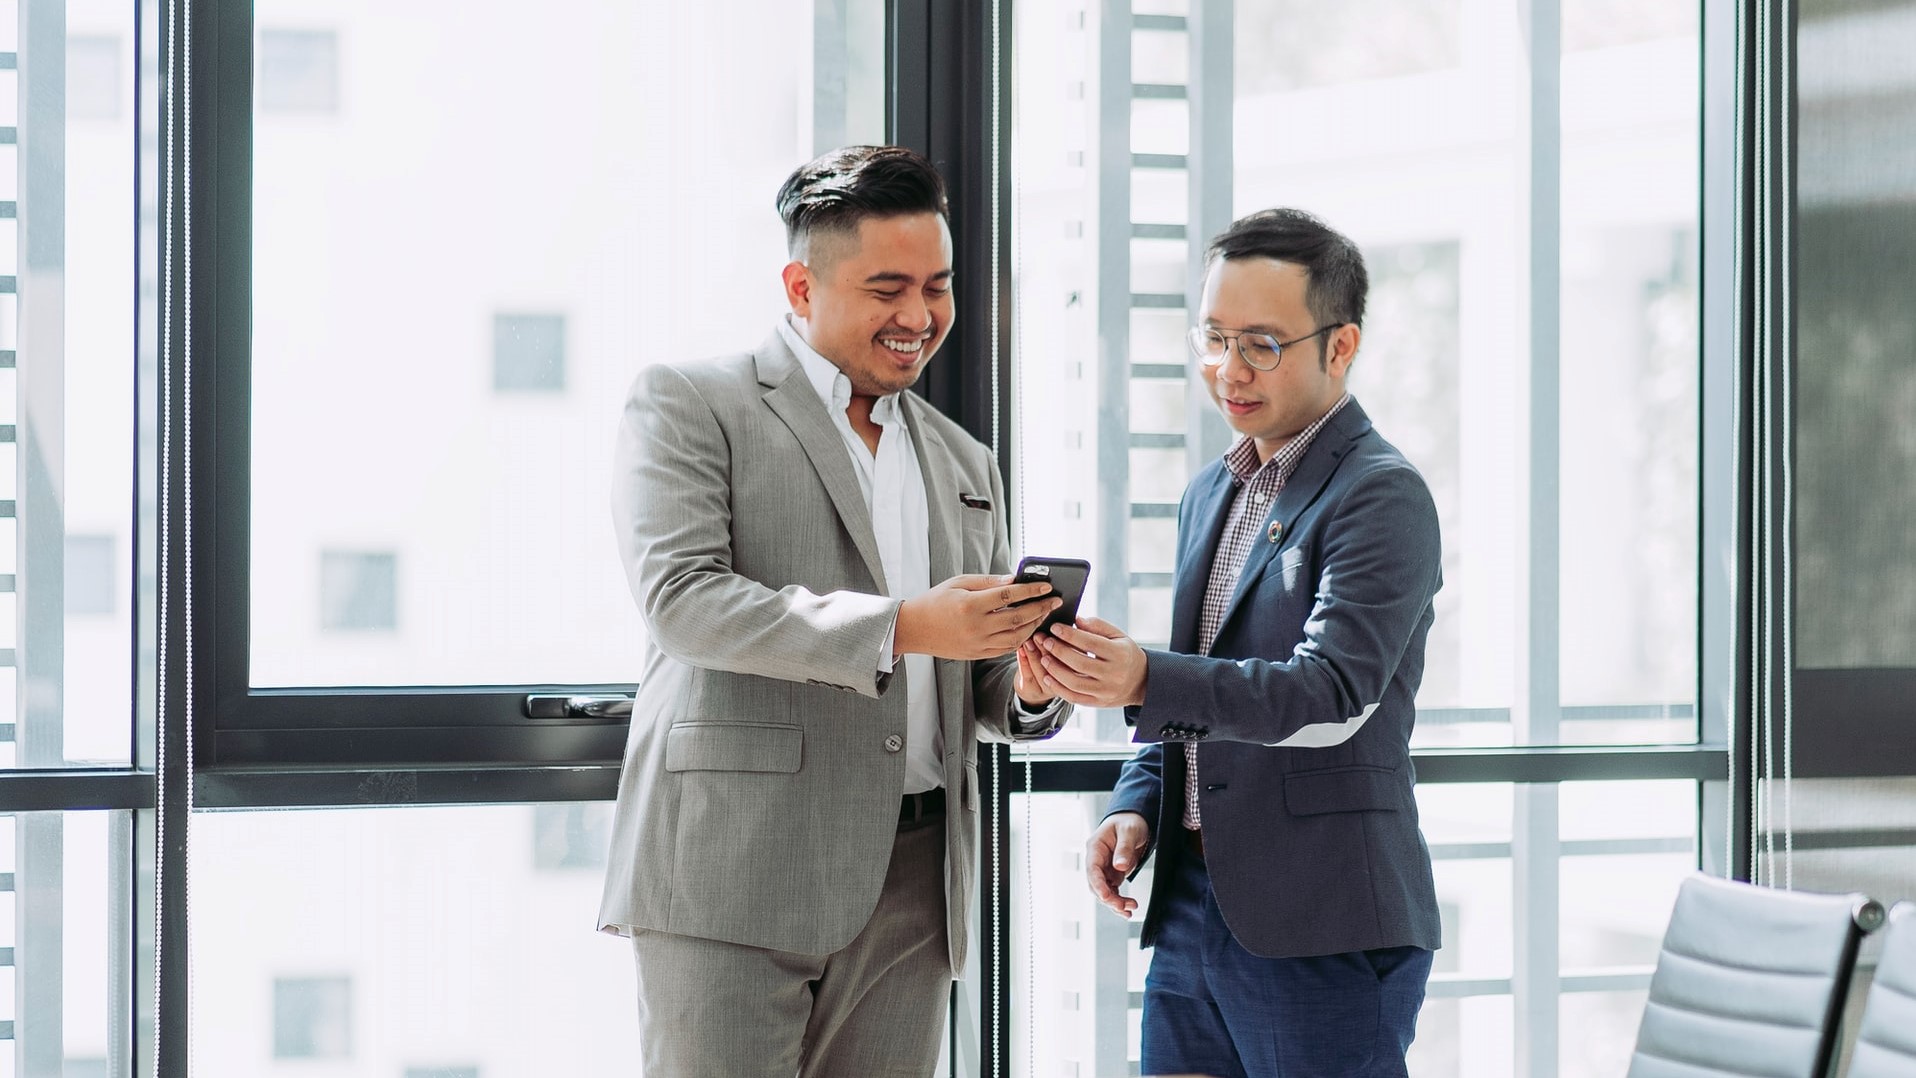 businessman sharing something on his phone to demonstrate value to another businessman